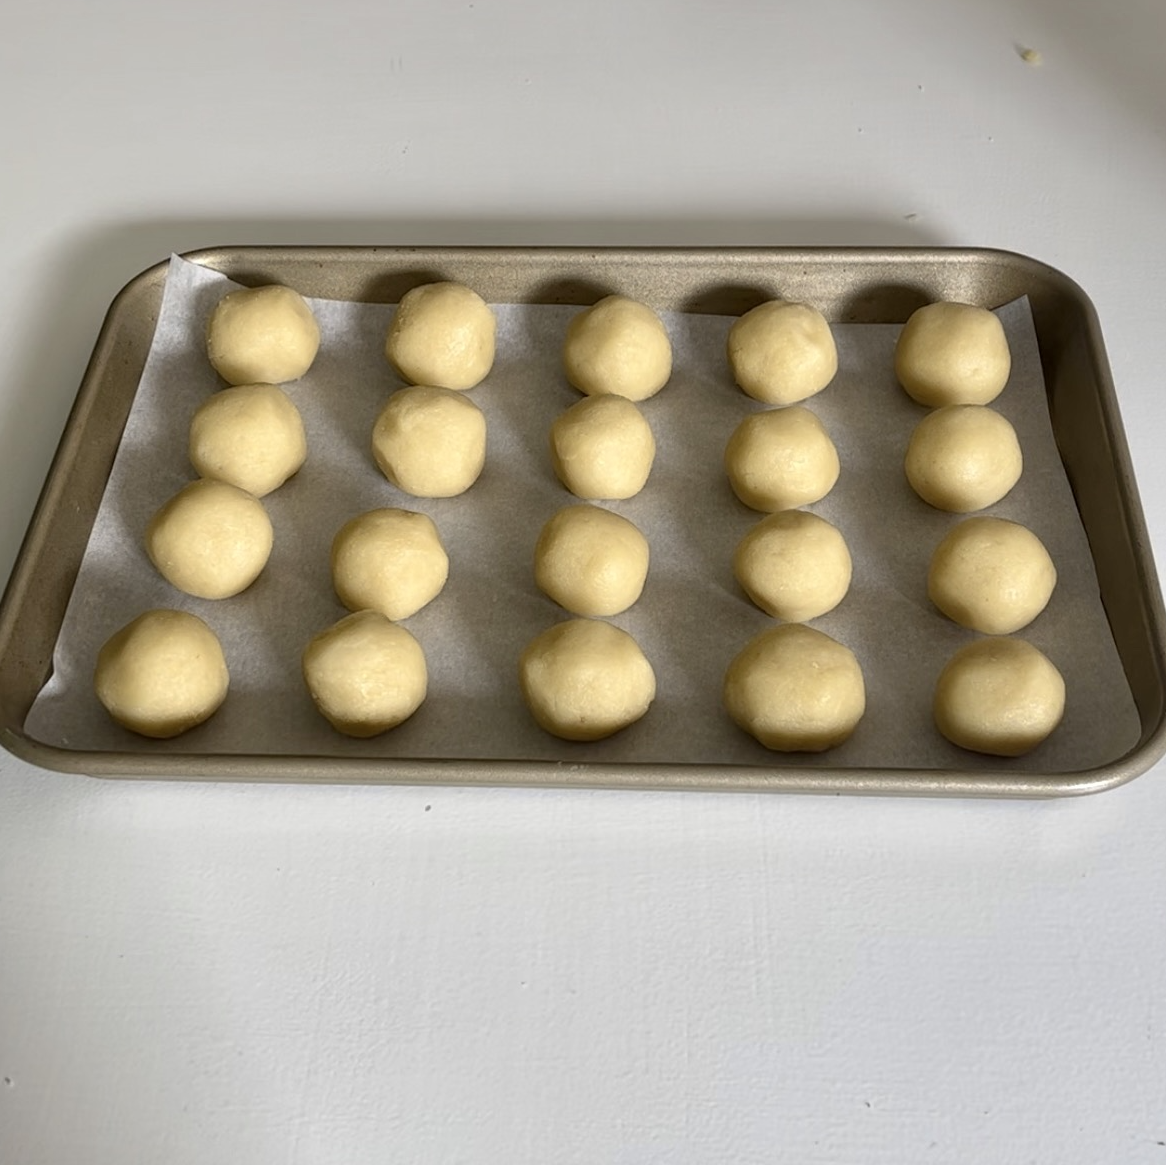 cake pops rolled into balls on baking sheet